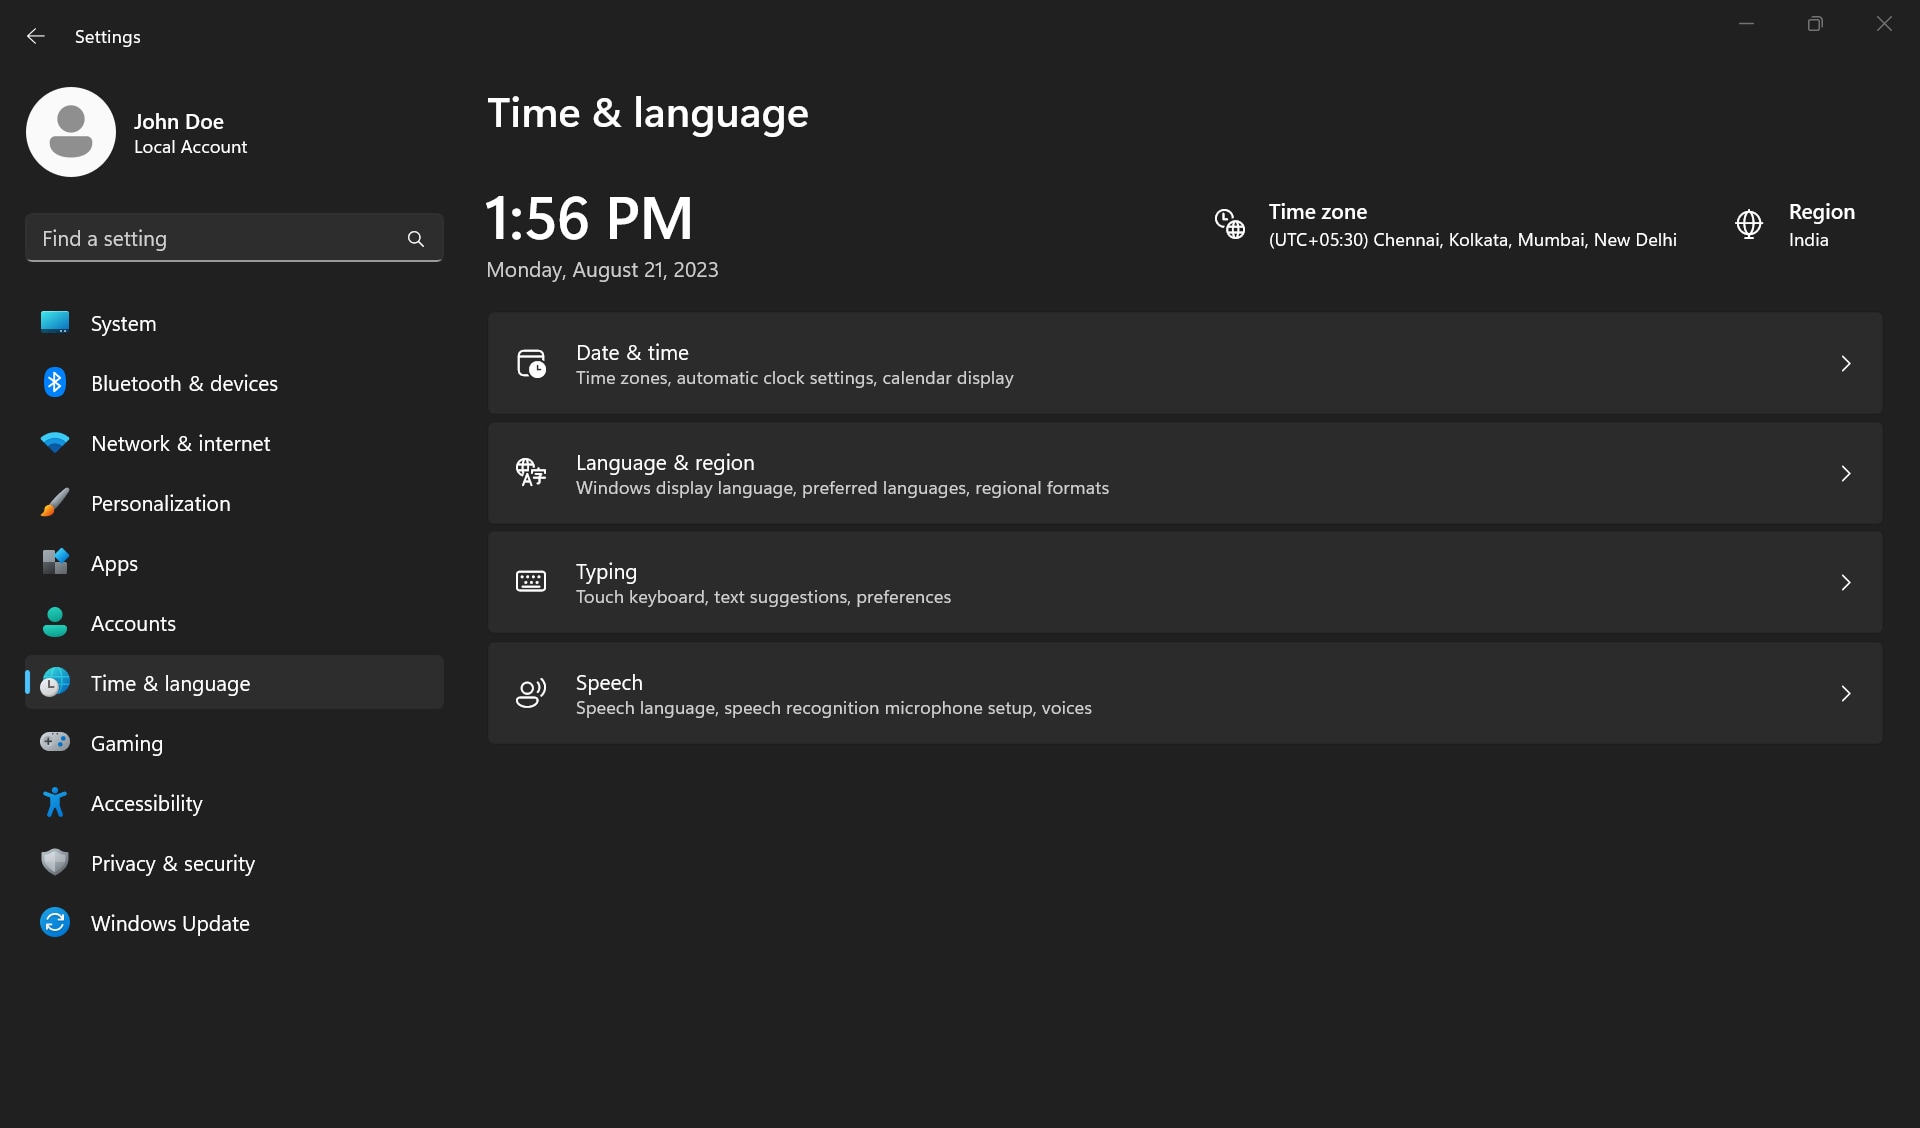 Date, time, language, region, typing, and speech options under the Time and language settings in Windows